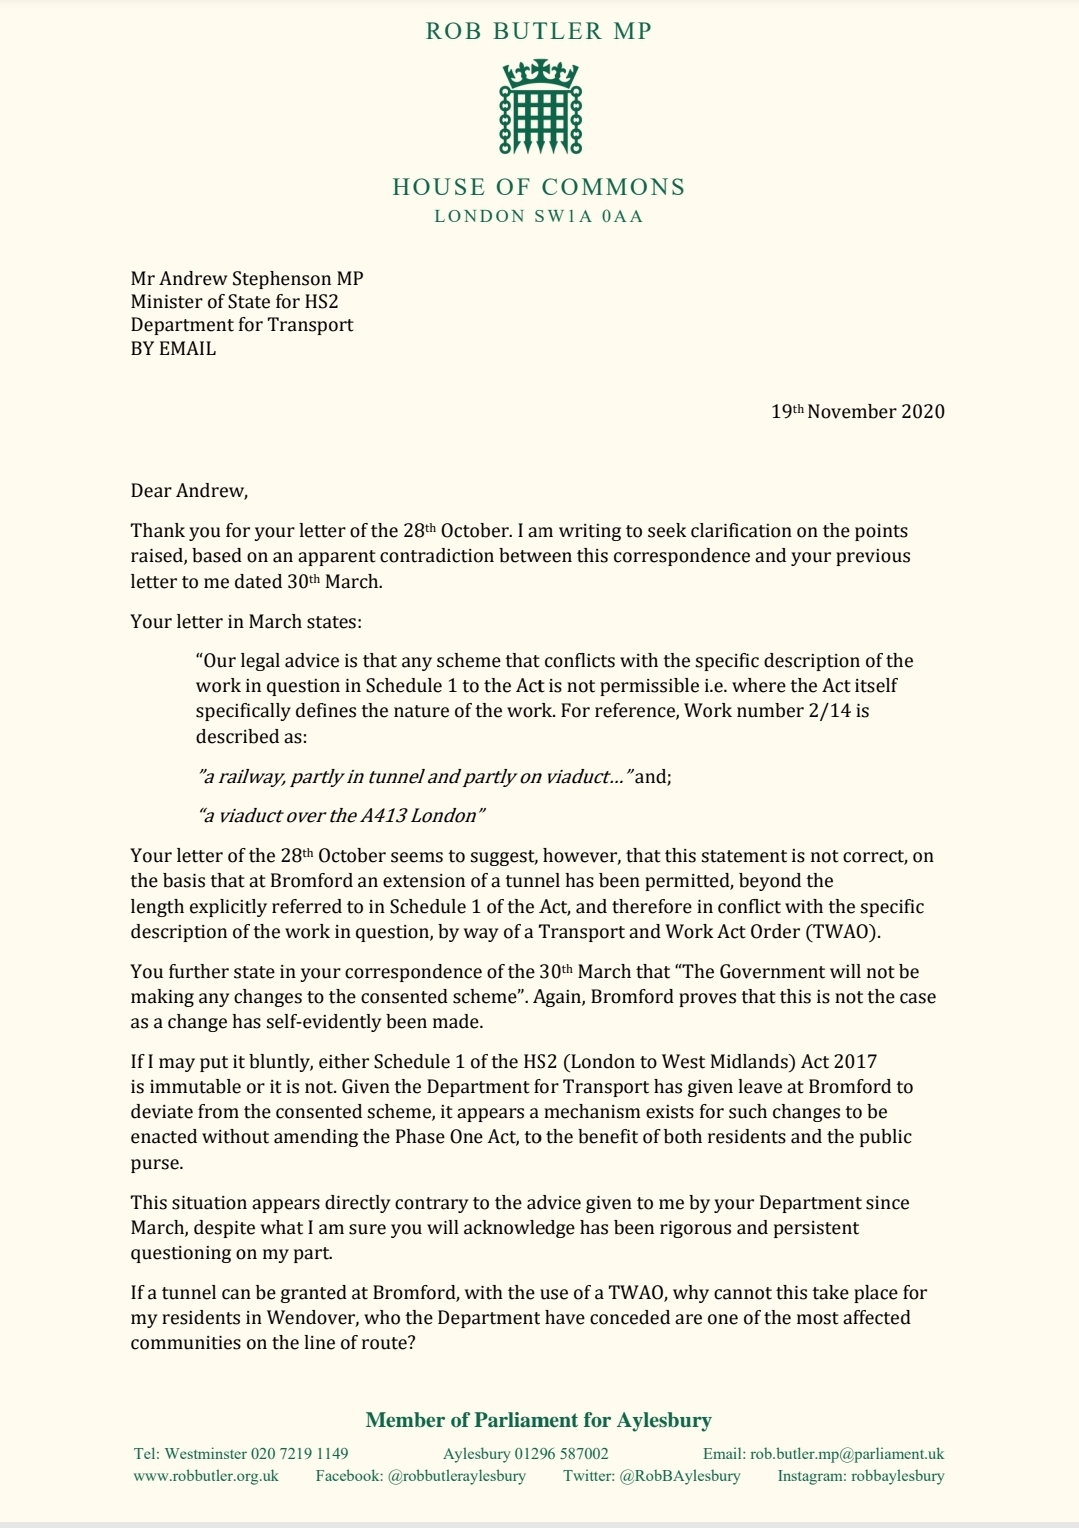 Rob Butler MP's letter to the HS2 Minister